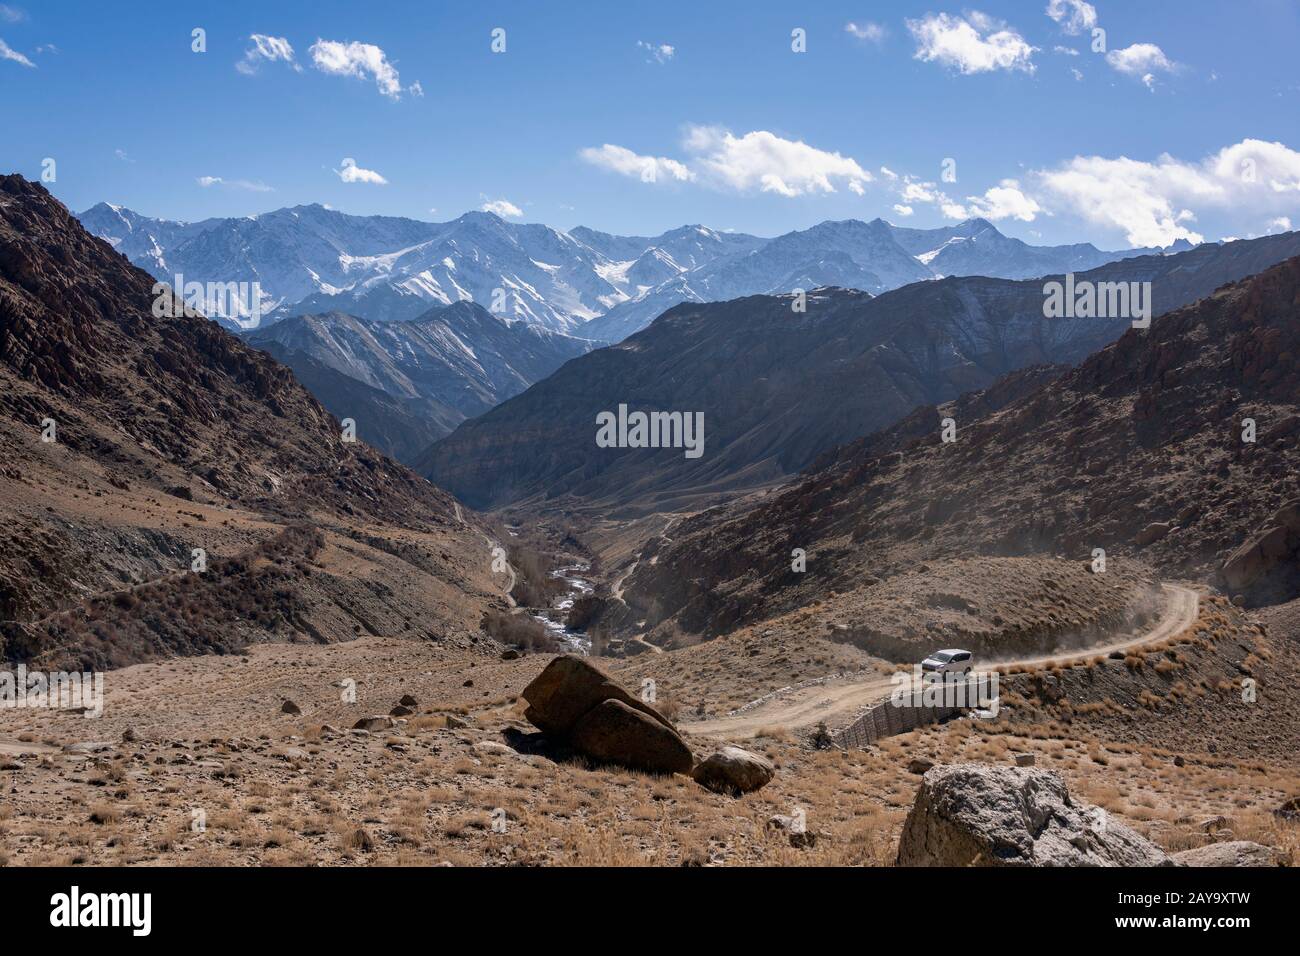 Off the beaten track at 13,000 ft on the Ulley Road, with the Ladakh Range, Jammu and Kashmir, India Stock Photo